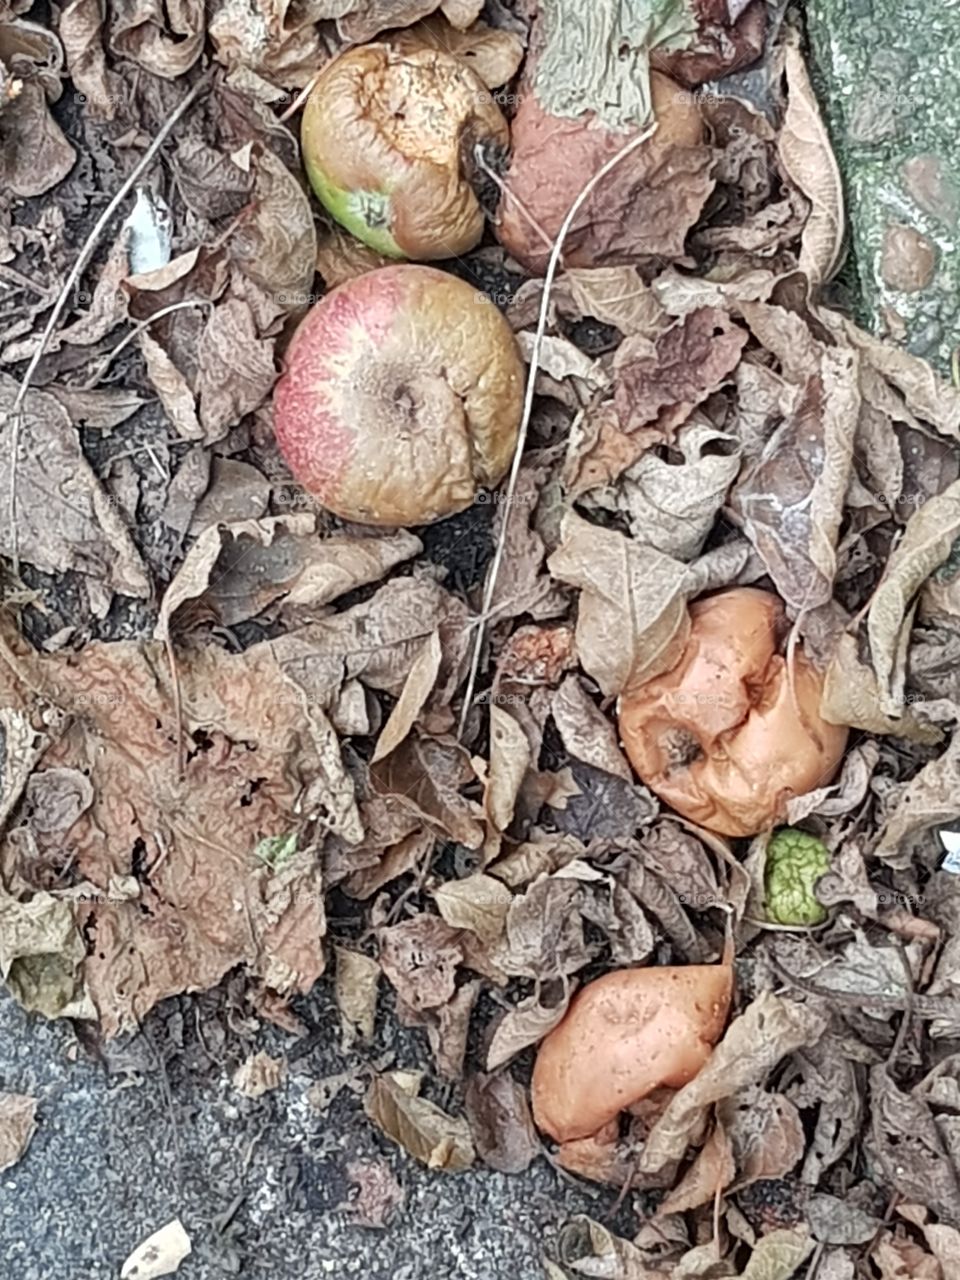 5 decaying apples